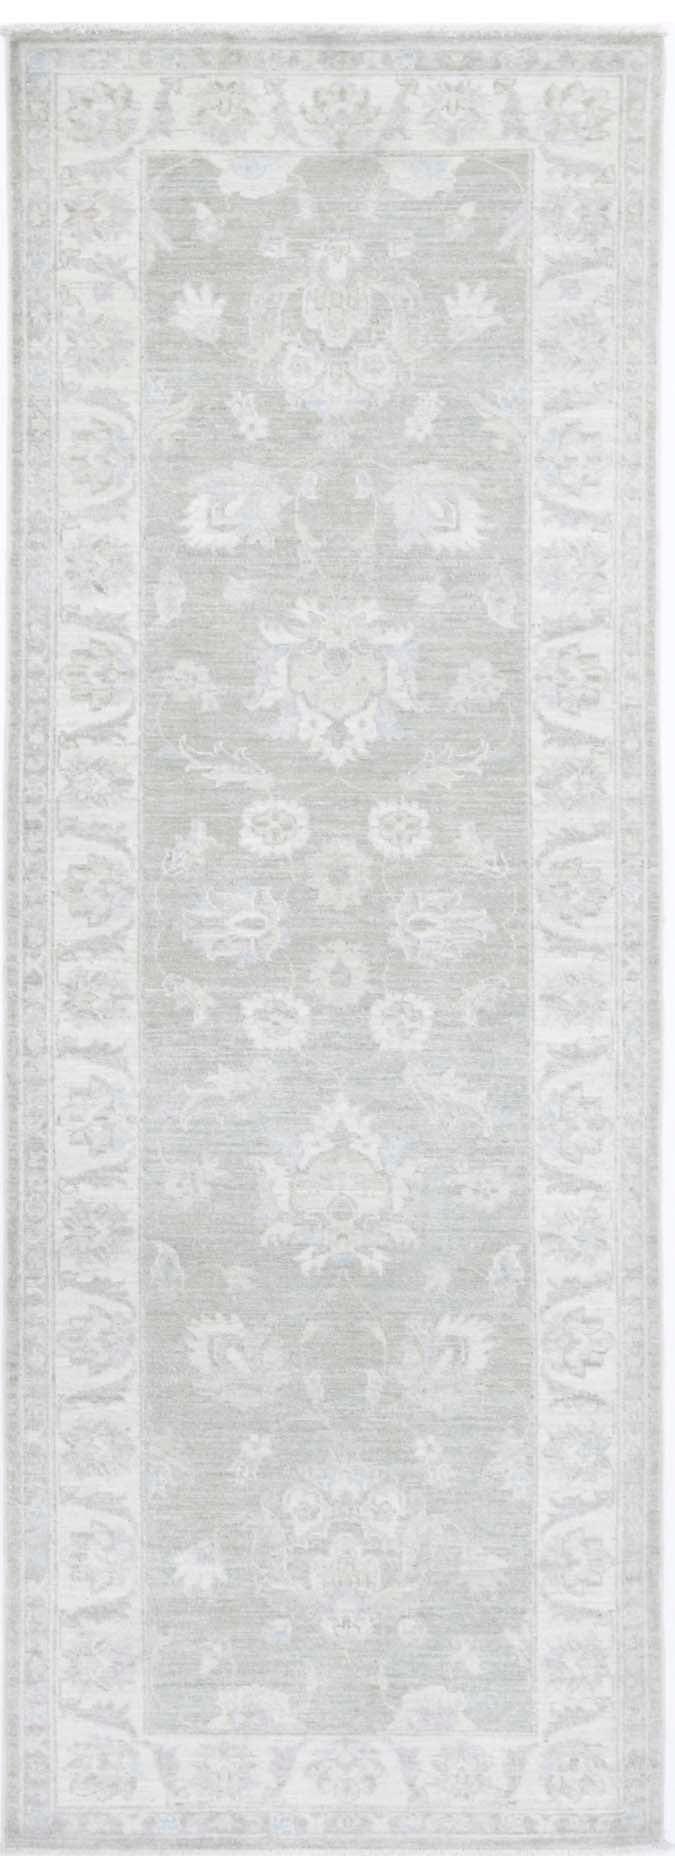 Hand Knotted Serenity Wool Rug - 2'9'' x 7'11''